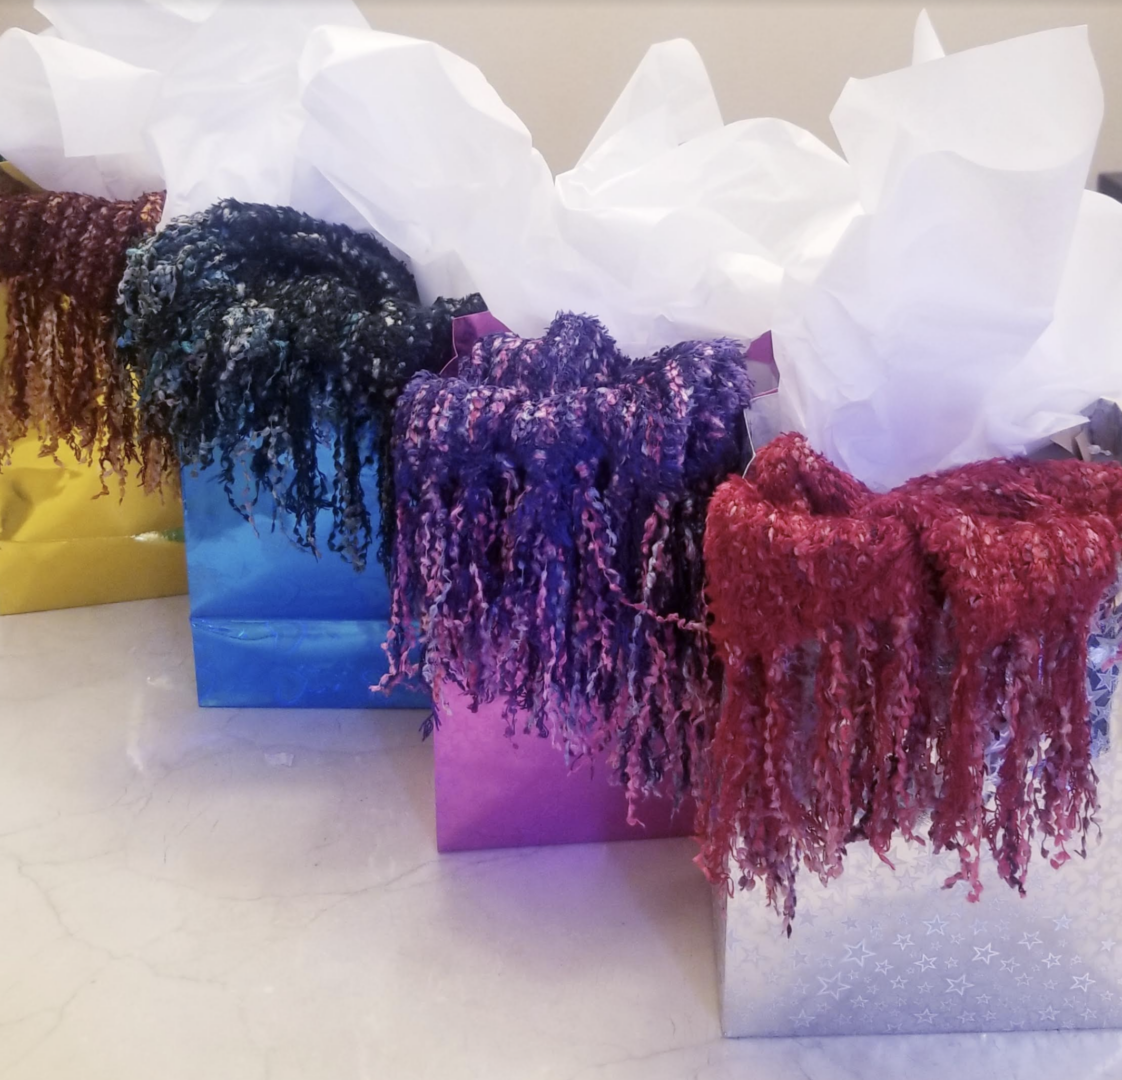 Four colored scarves in gift bags